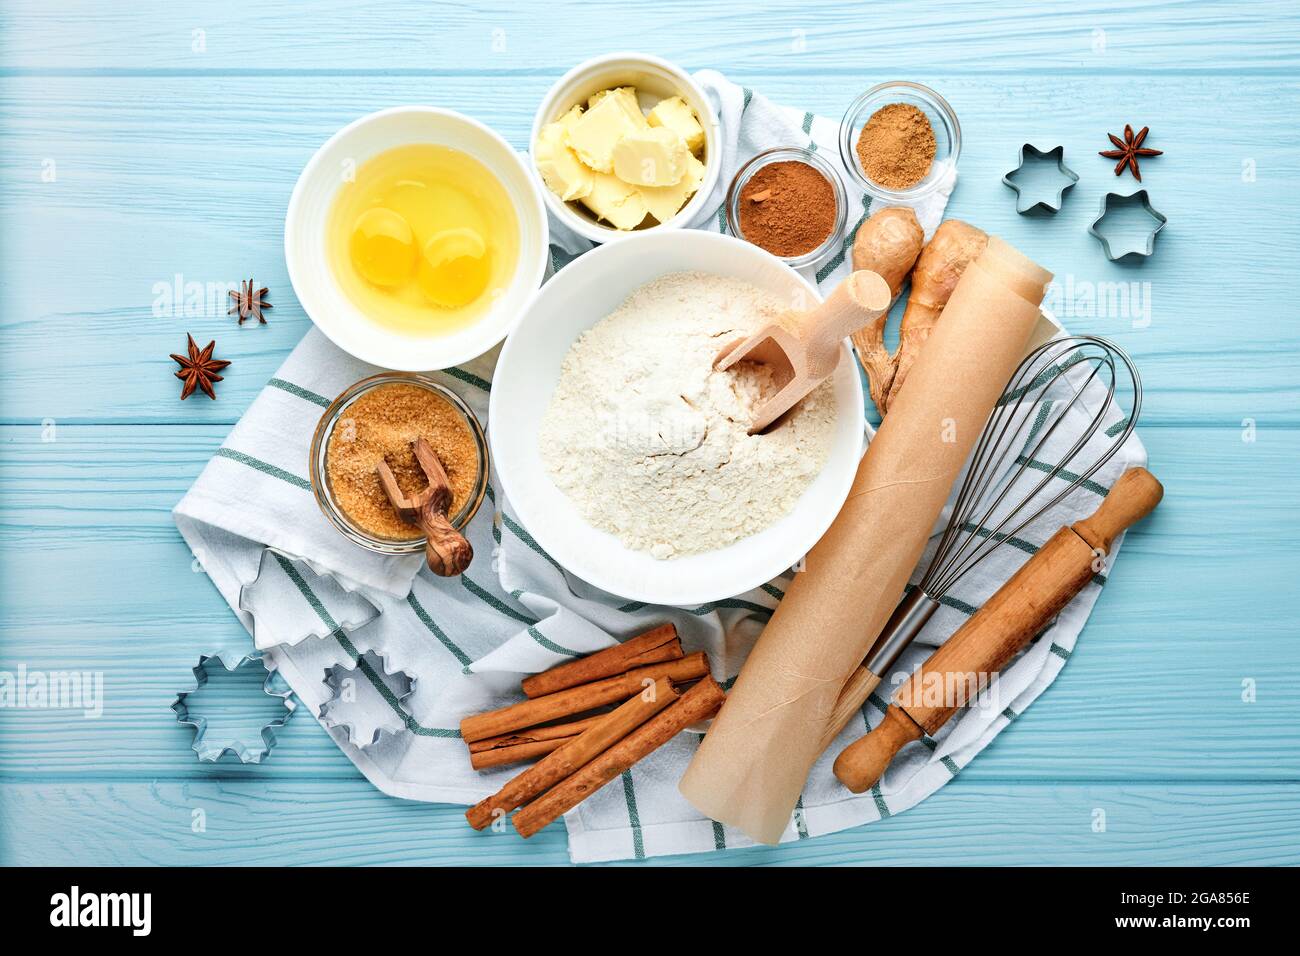 Baking background with ingredients for making gingerbread flour, eggs, kitchen tools, utensils and cookie molds on blue wooden table. Top view. Flat l Stock Photo